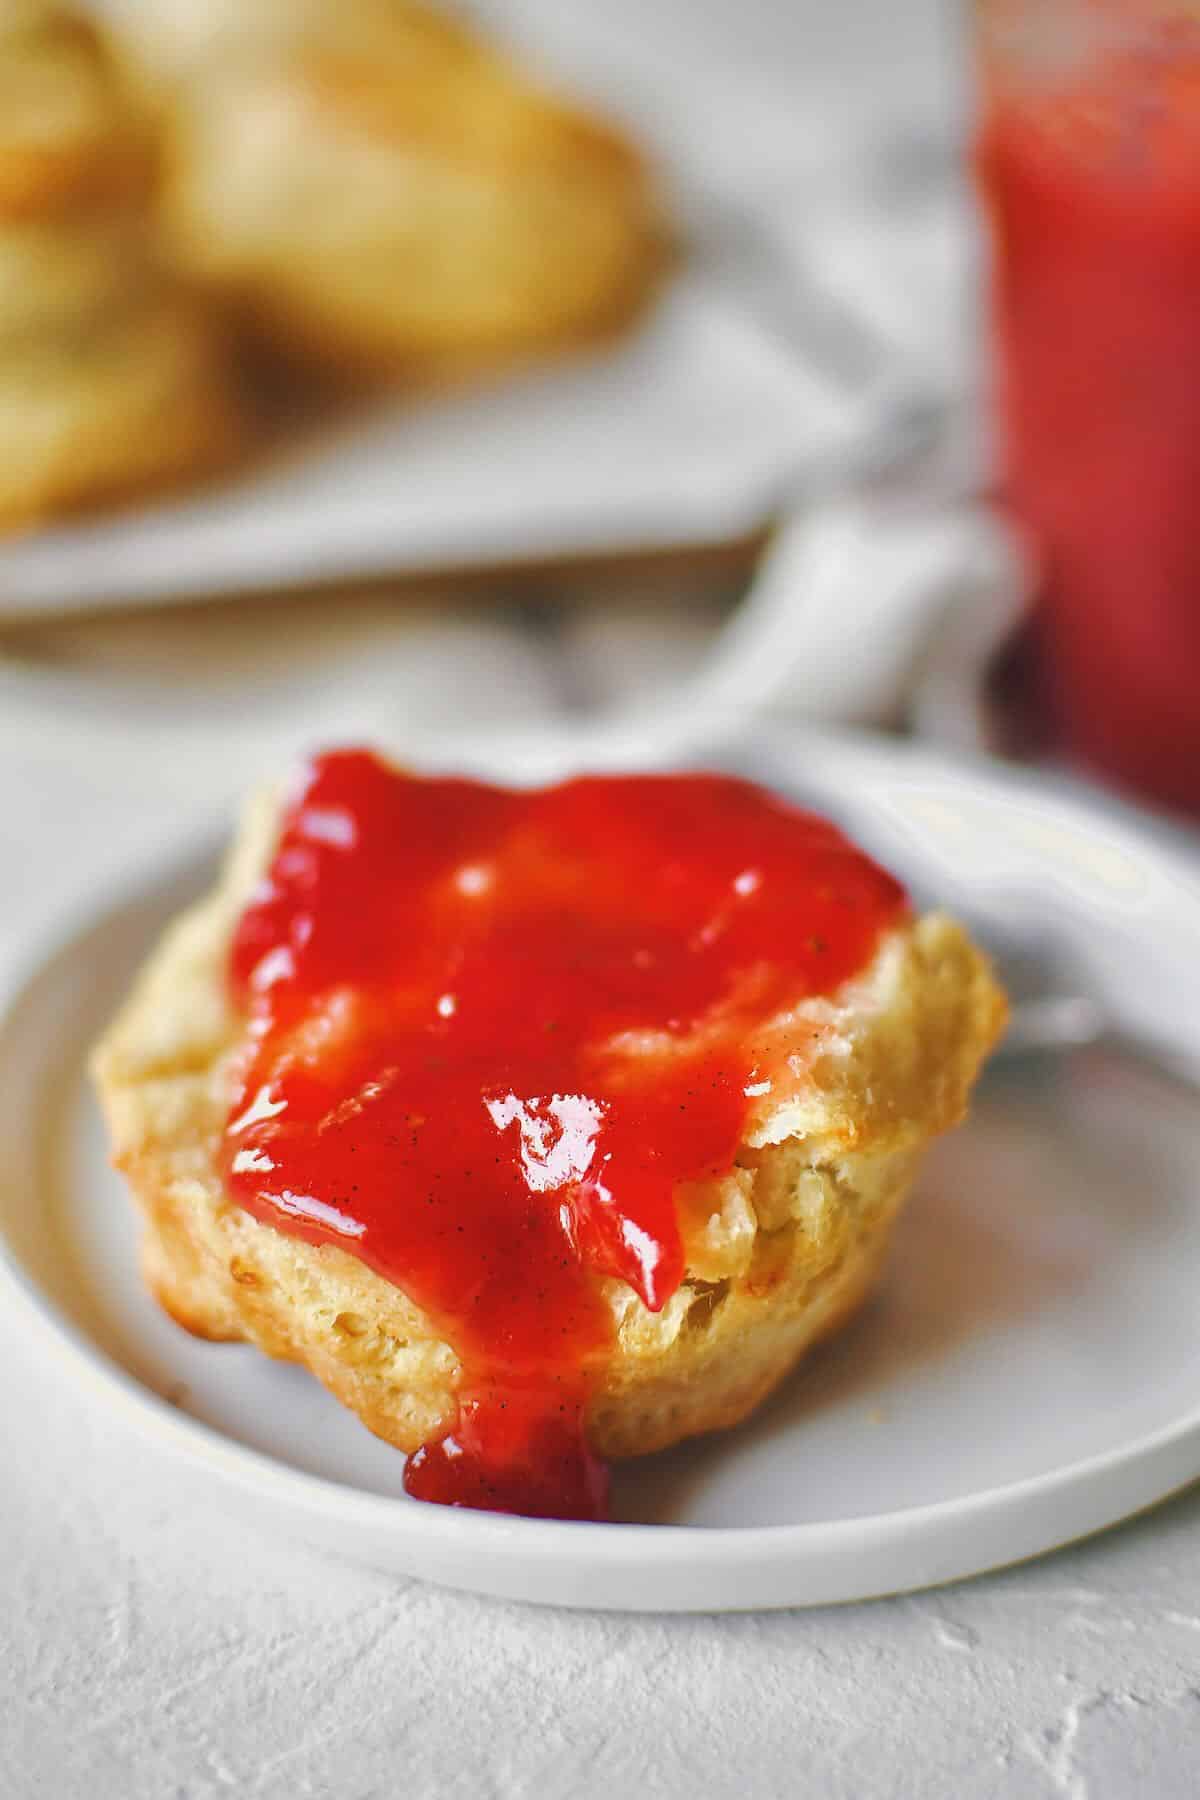 Strawberry Rhubarb Jam being enjoyed on a fresh biscuit.